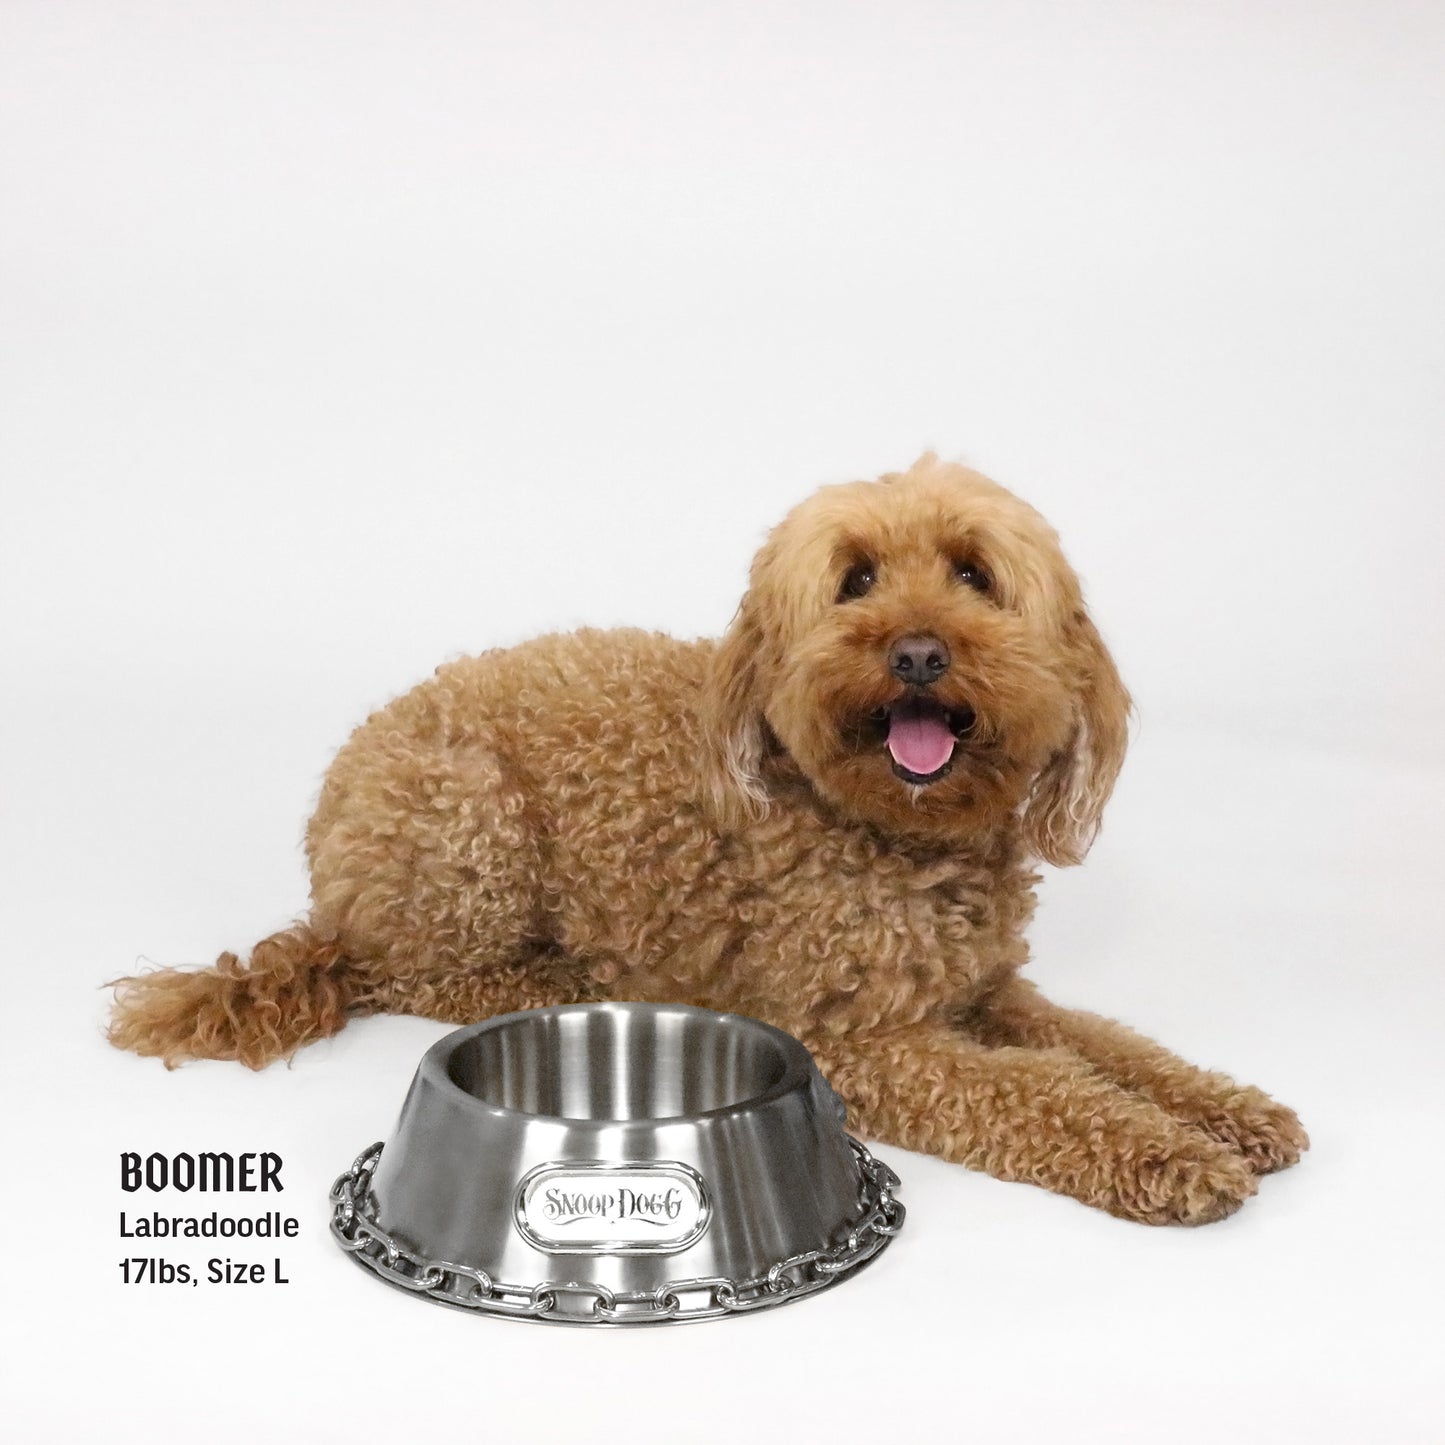 Boomer the Labradoodle laying next to the Large Deluxe Silver Pet Bowl.